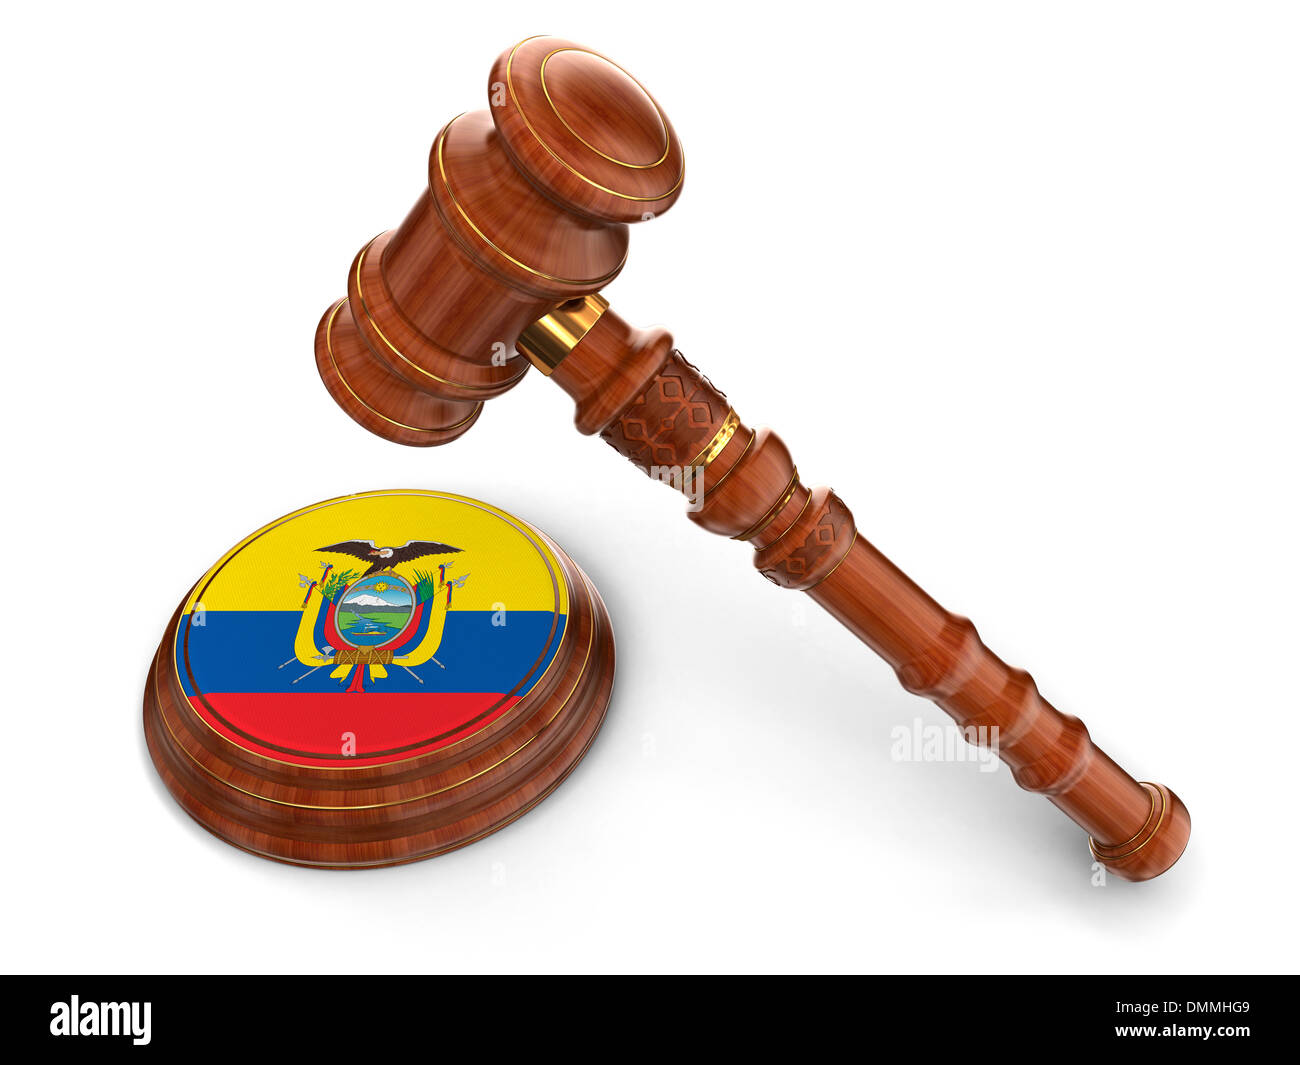 Wooden Mallet and Ecuadorian flag (clipping path included) Stock Photo